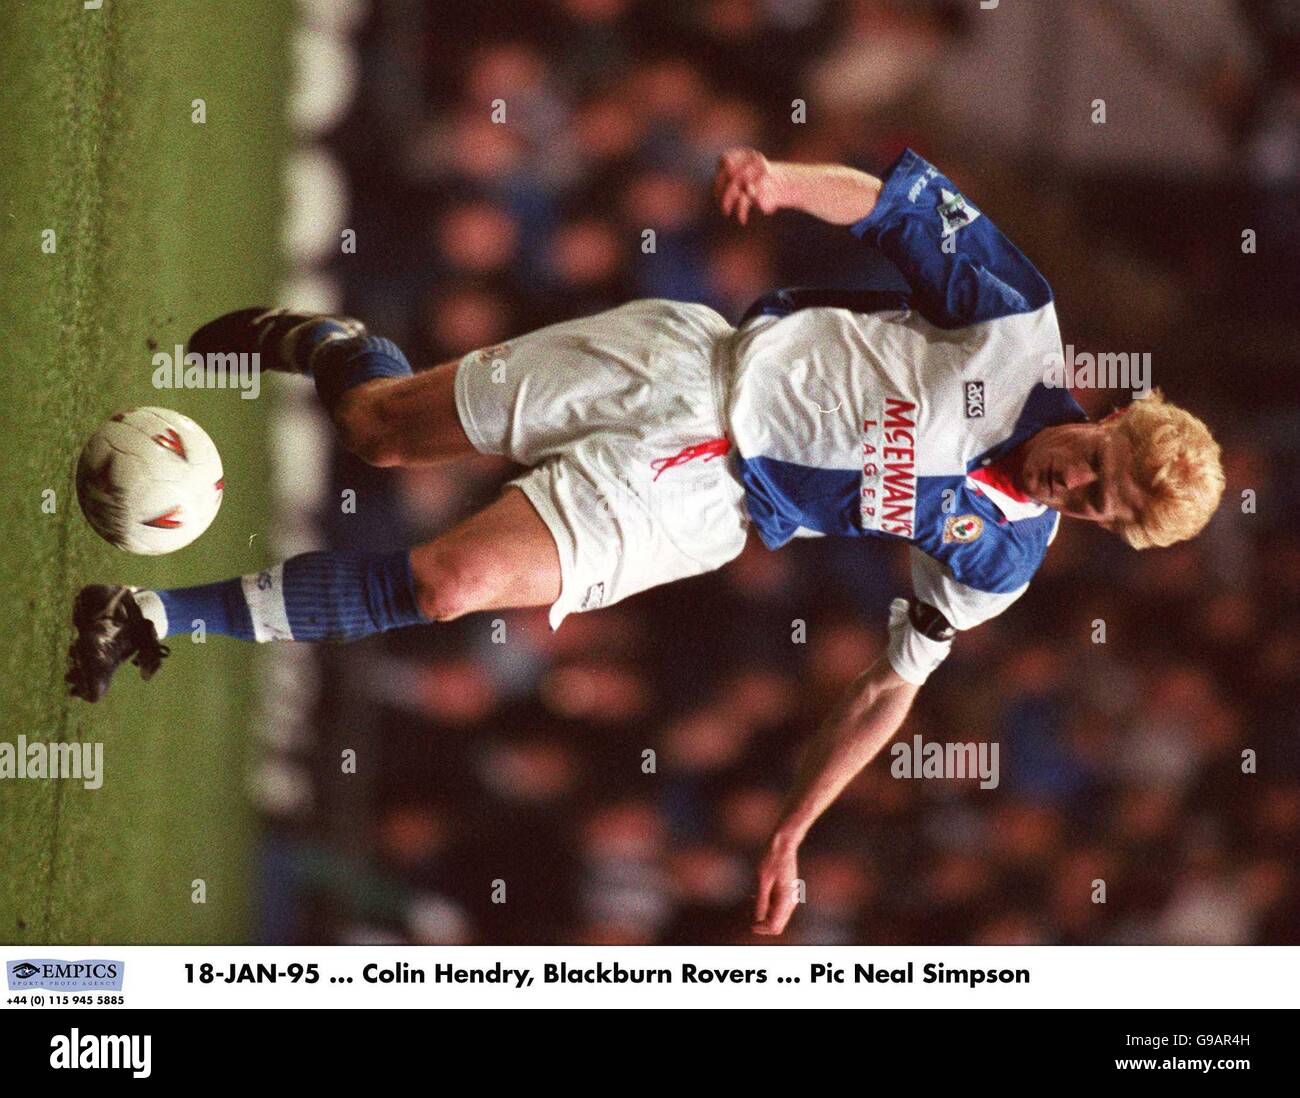 164169 Colin Hendry. 18 JANVIER 95. Colin Hendry, Blackburn Rovers Banque D'Images